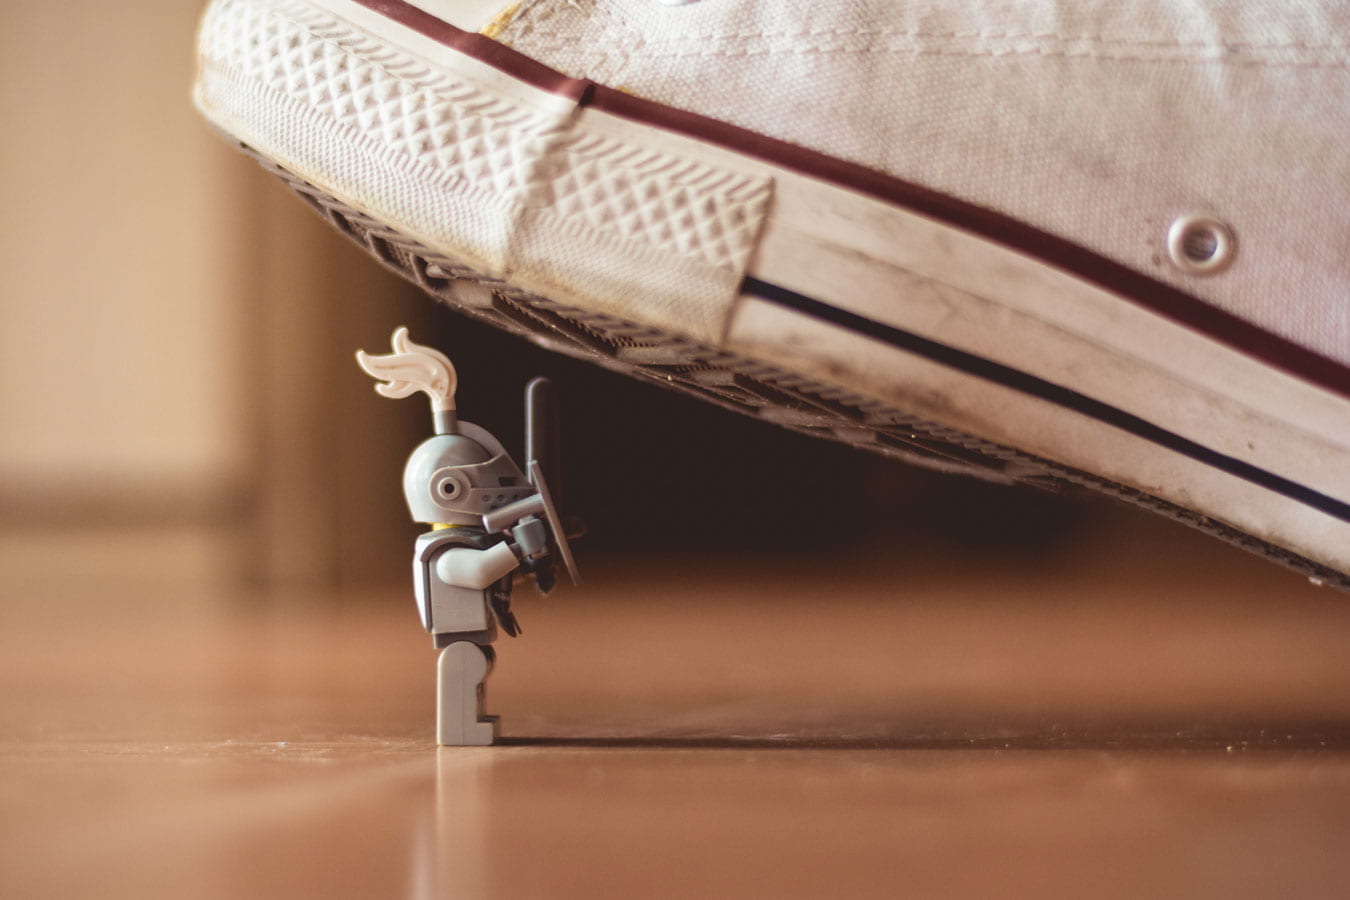 Close up shot of a lego knight almost being stepped on by a converse shoe